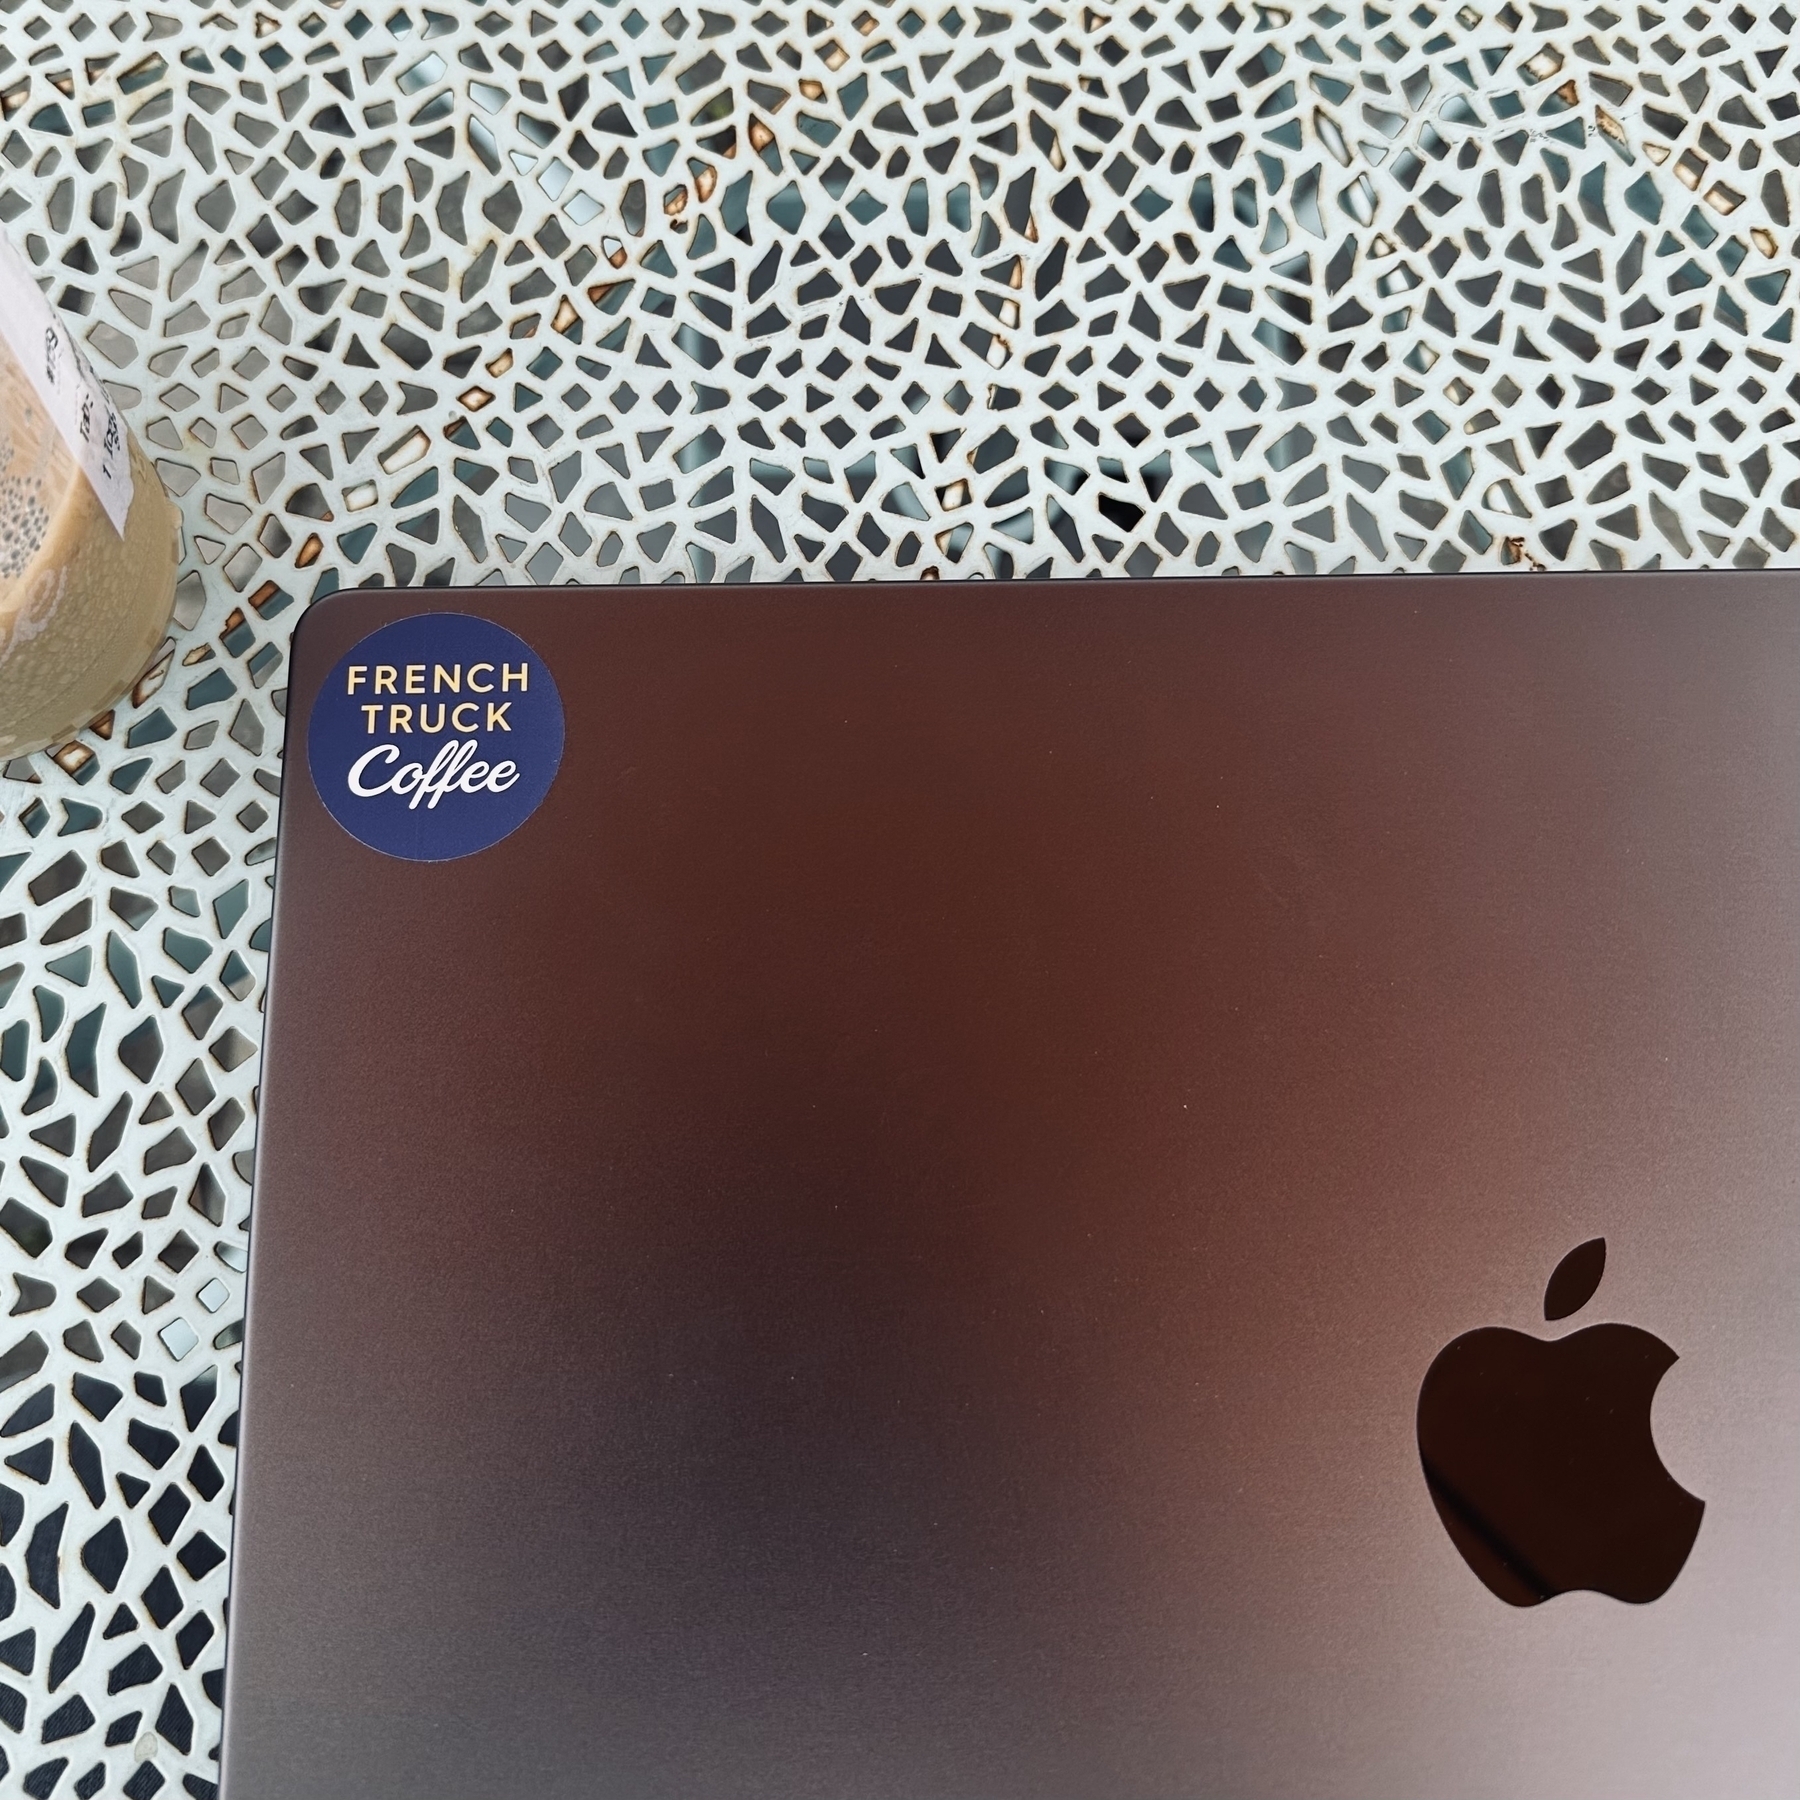 French Truck Coffee sticker on MacBook Pro with iced latter in the corner on outside blue table.